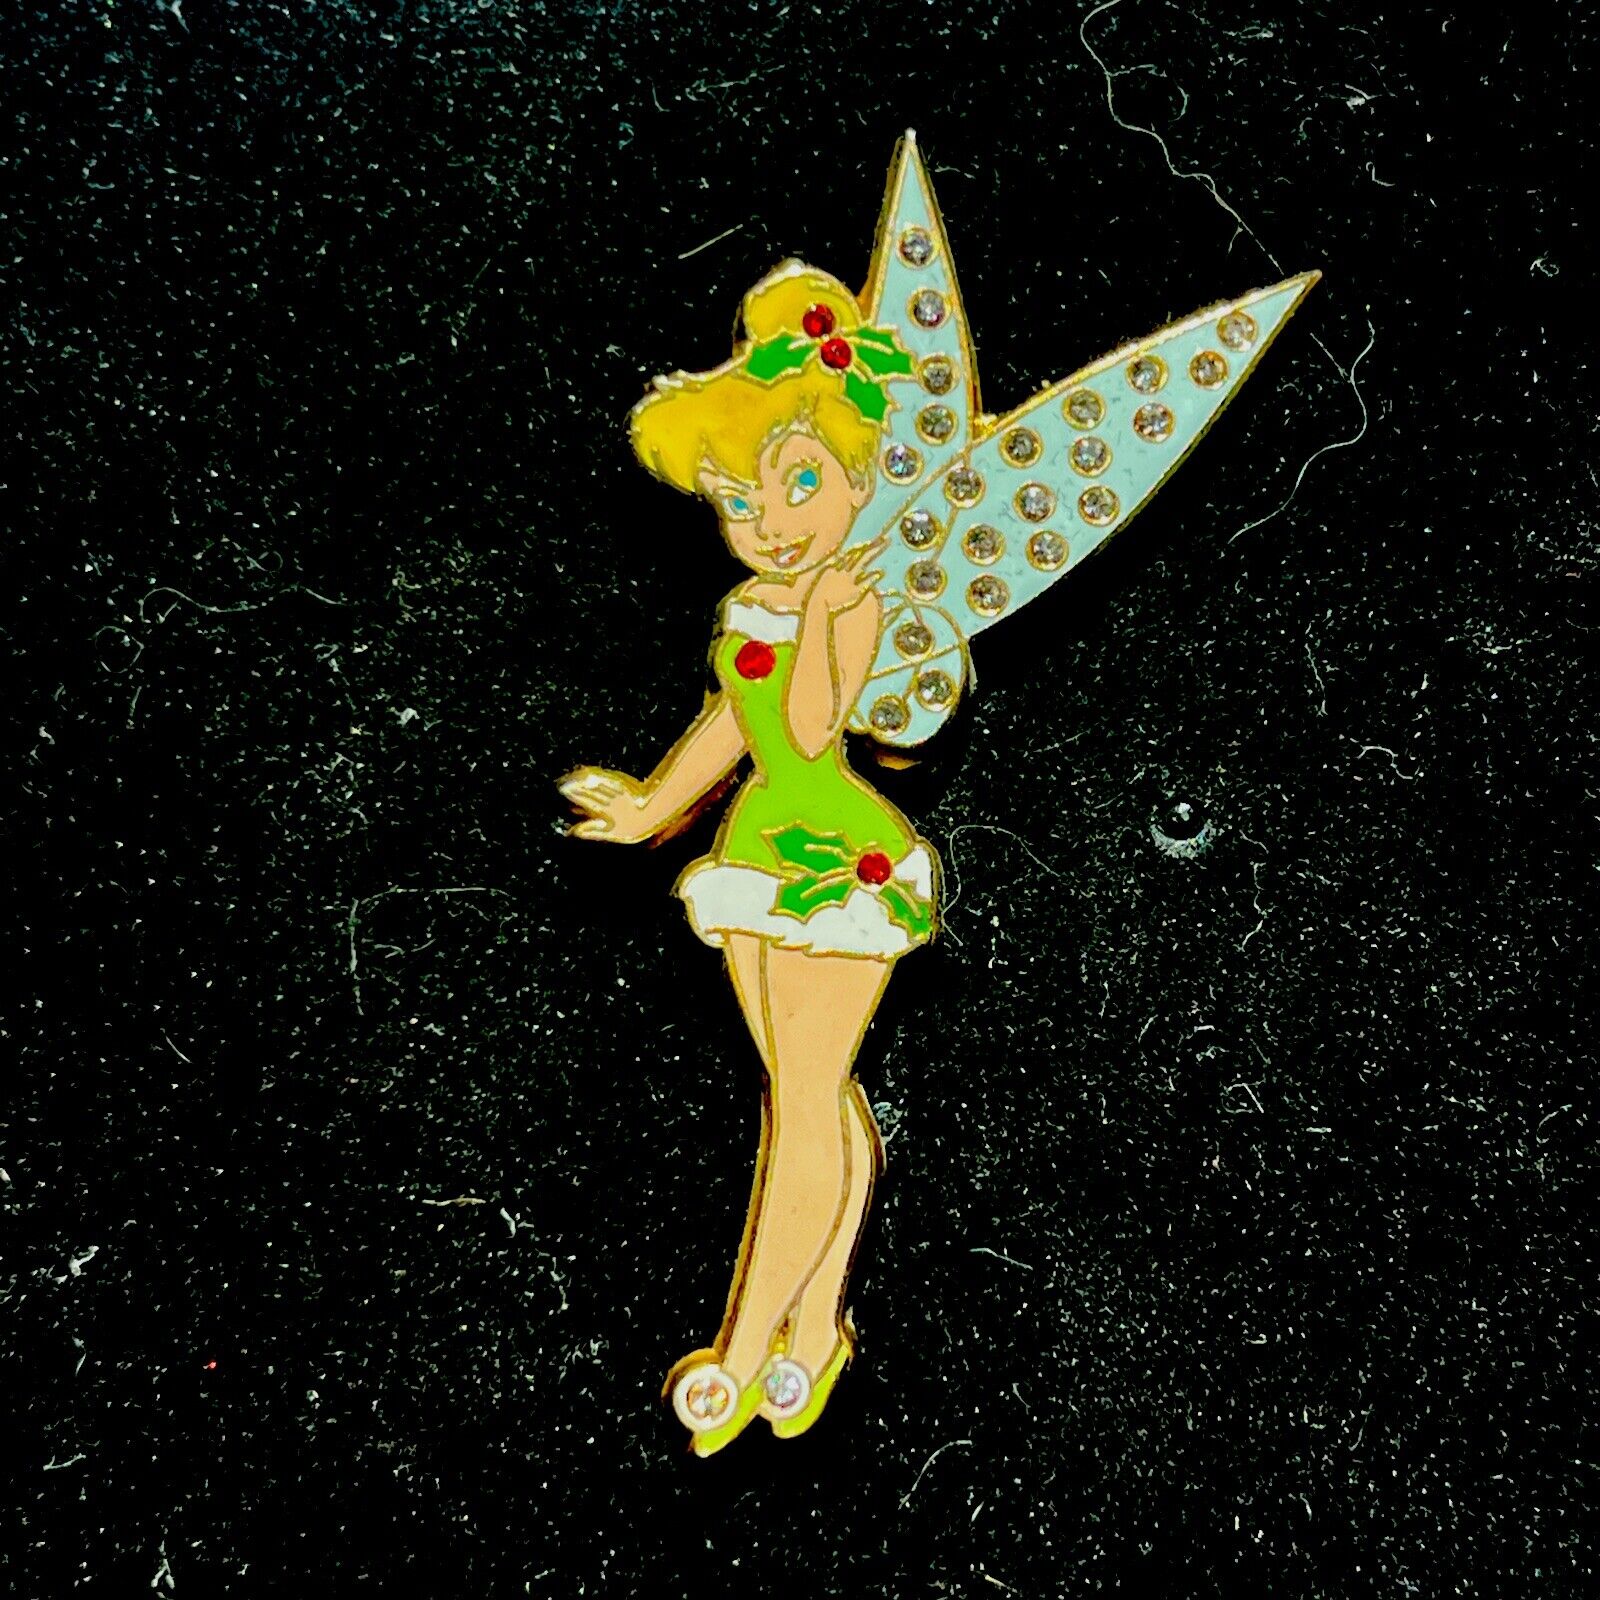 RARE PAVE Disney Shopping Pin Tinker Bell Pavé Pixie Holiday LE 250 2008